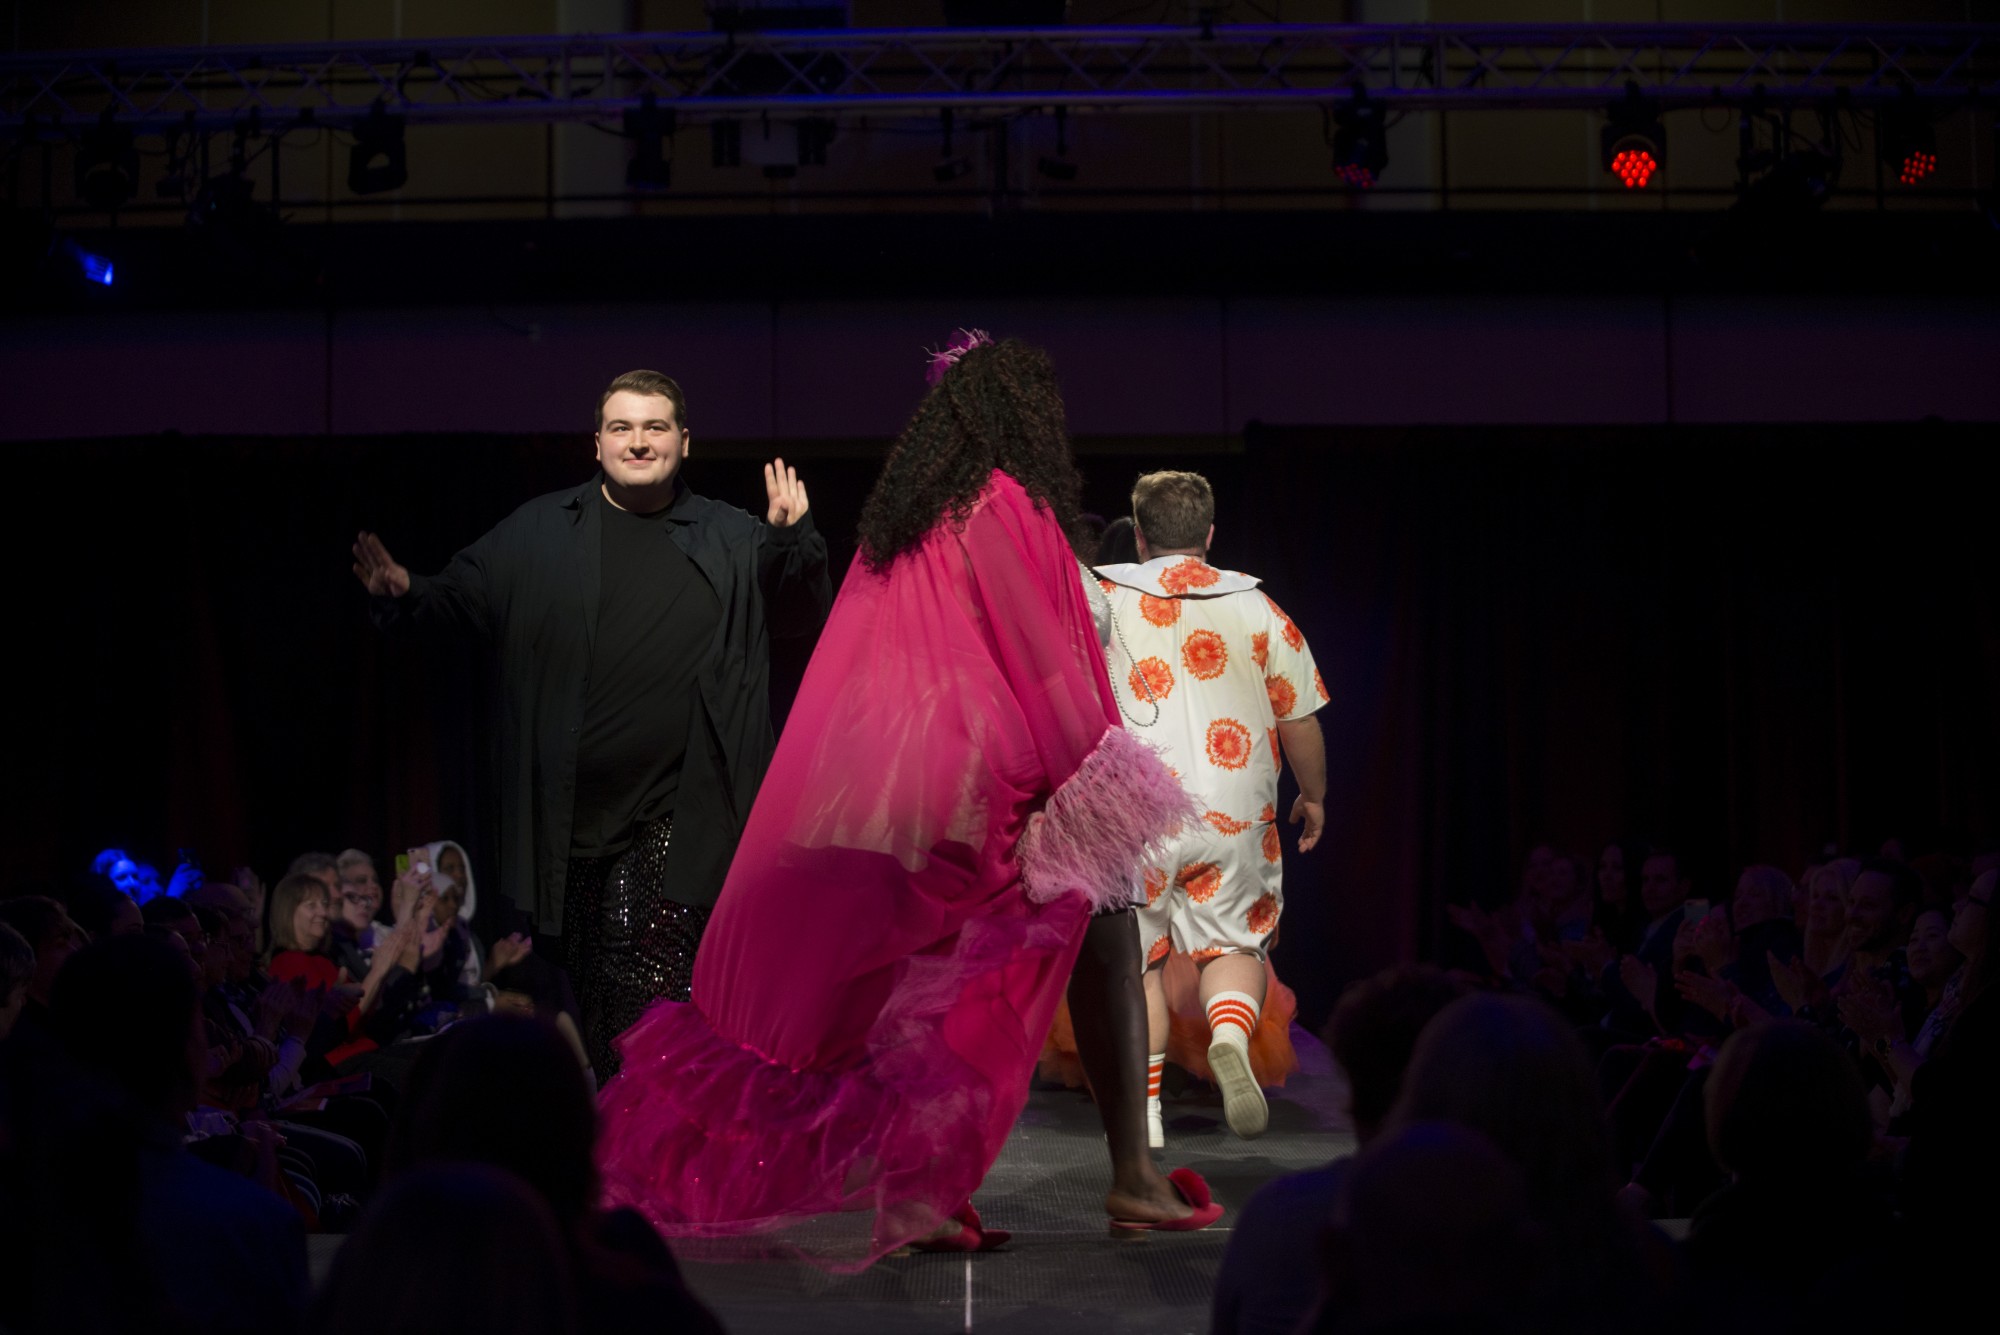 Models showing Designer Ian Harris work walk the runway at the Amplified fashion show at Rapson Hall on Saturday, Feb. 15. The show features designs by University of Minnesota apparel design seniors.